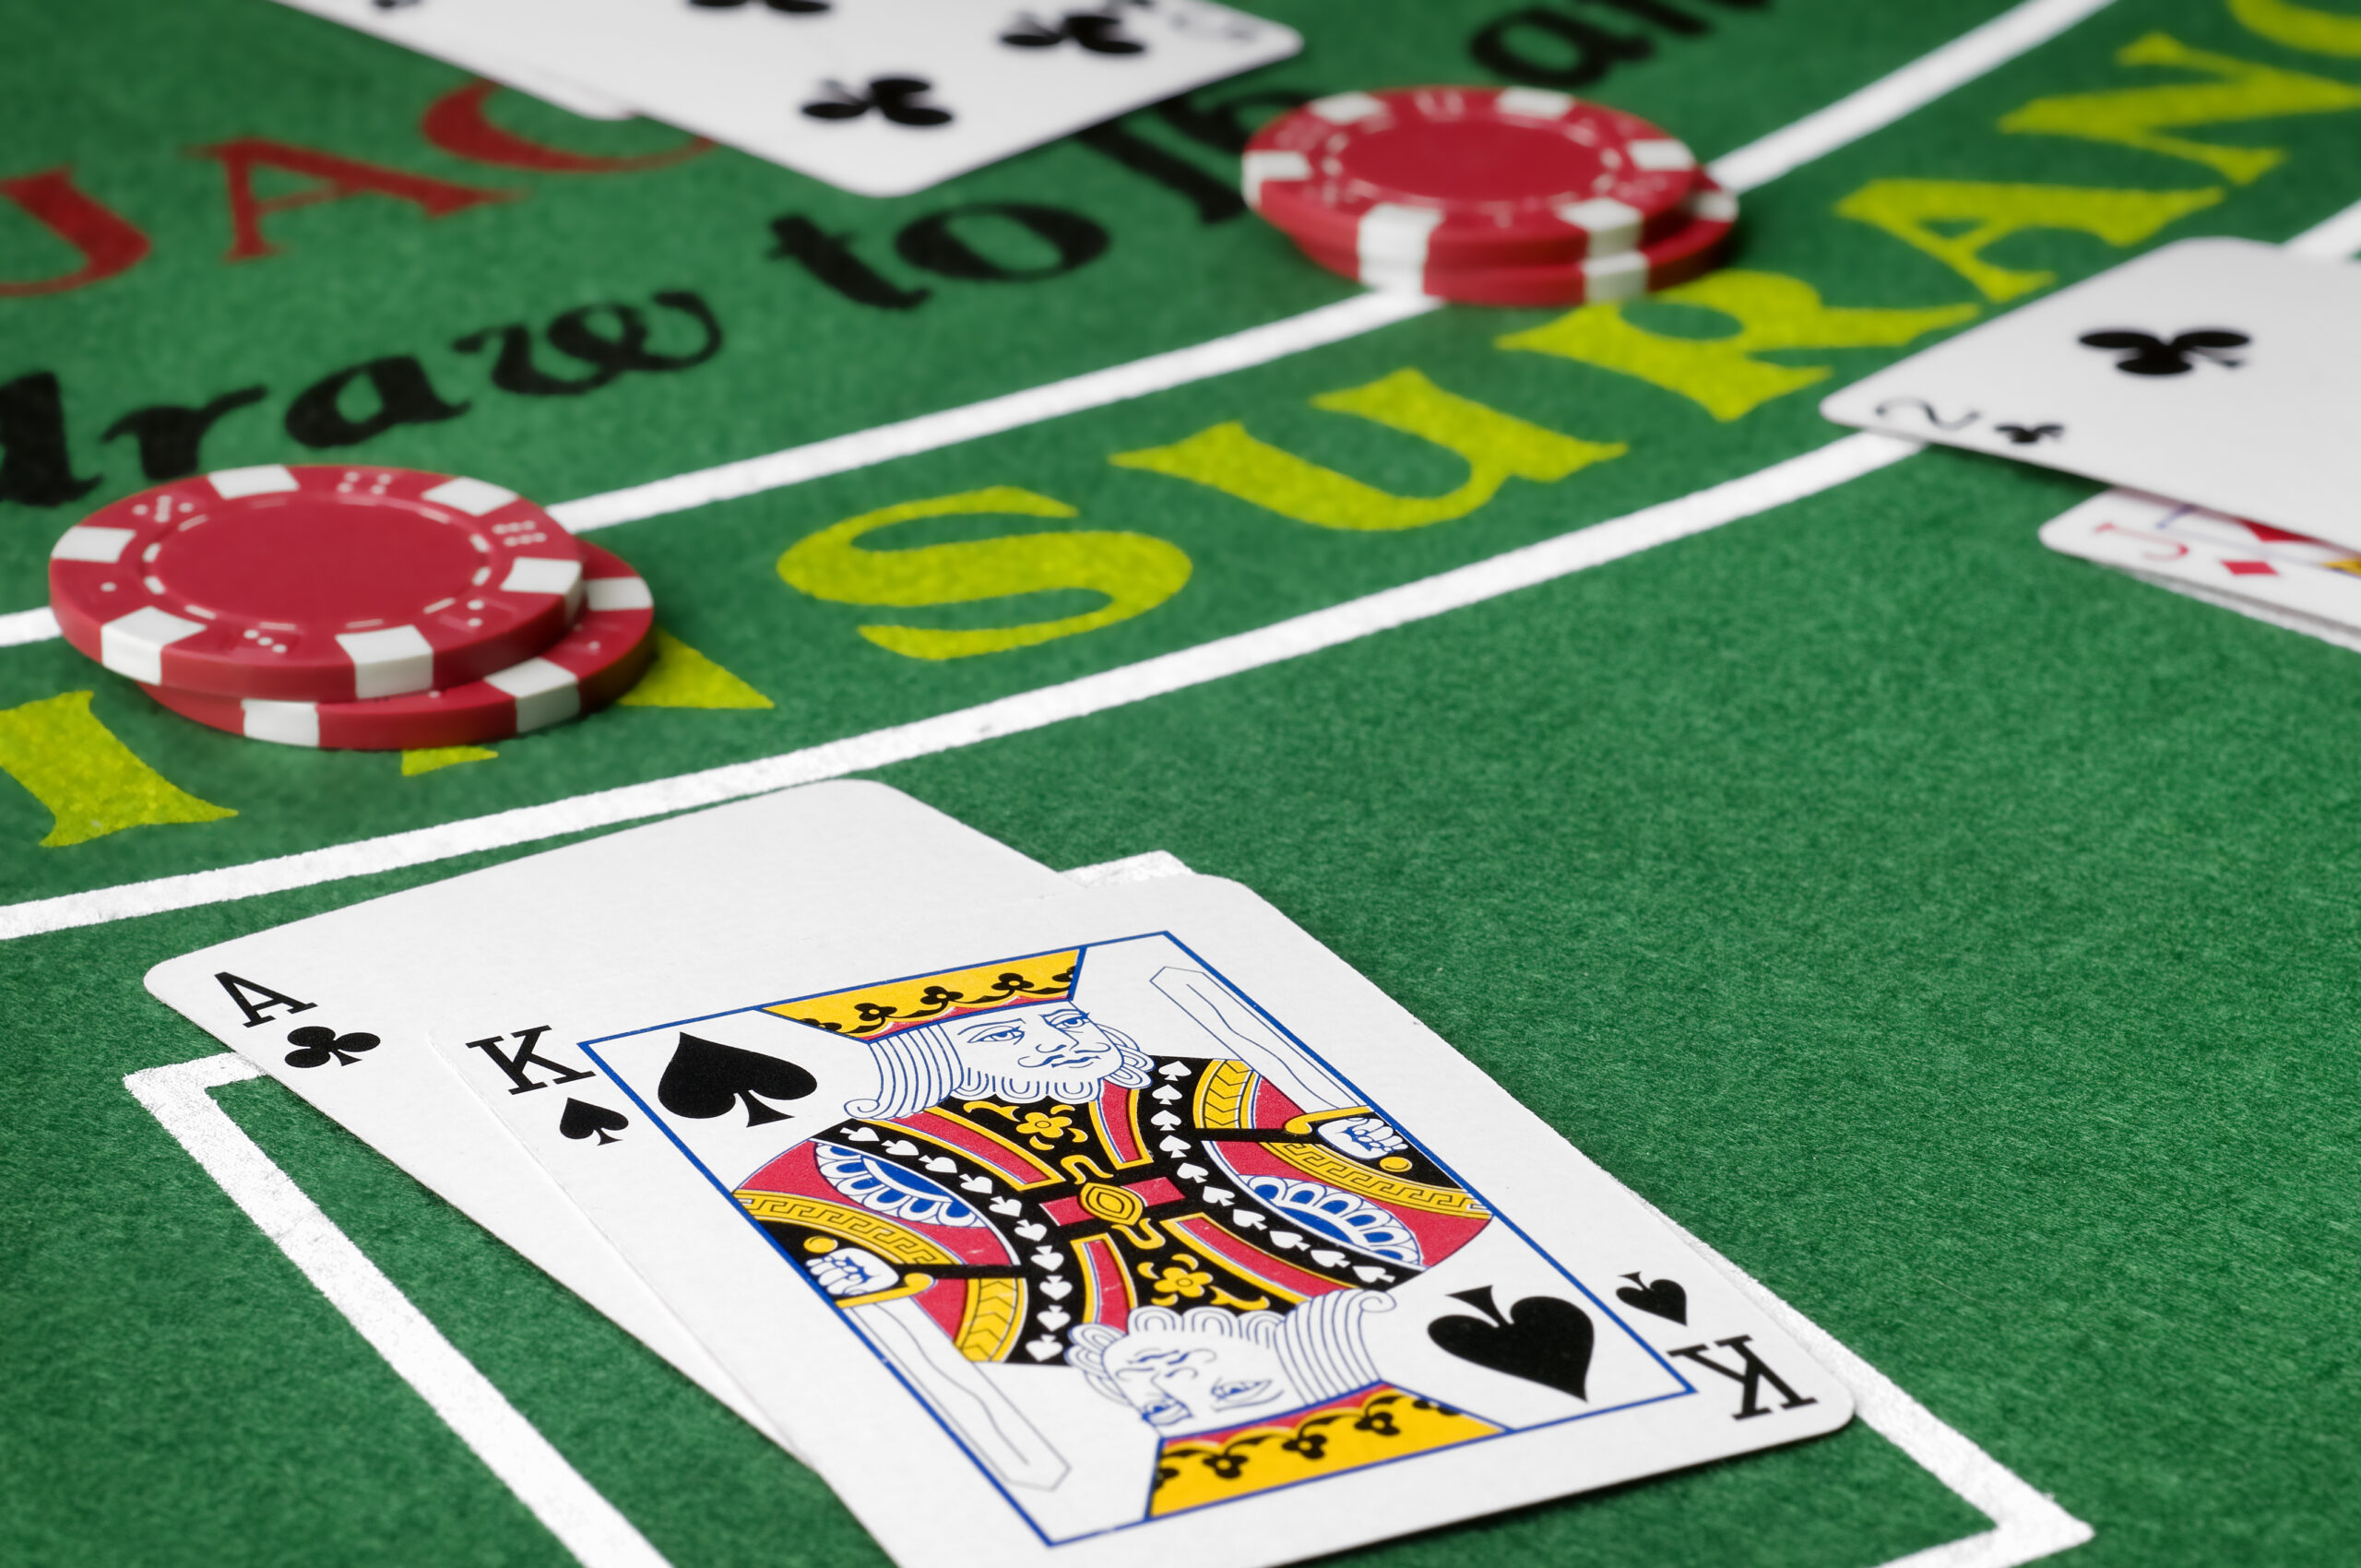 Casino Rating Systems - What Are They? Can They Be Trusted?